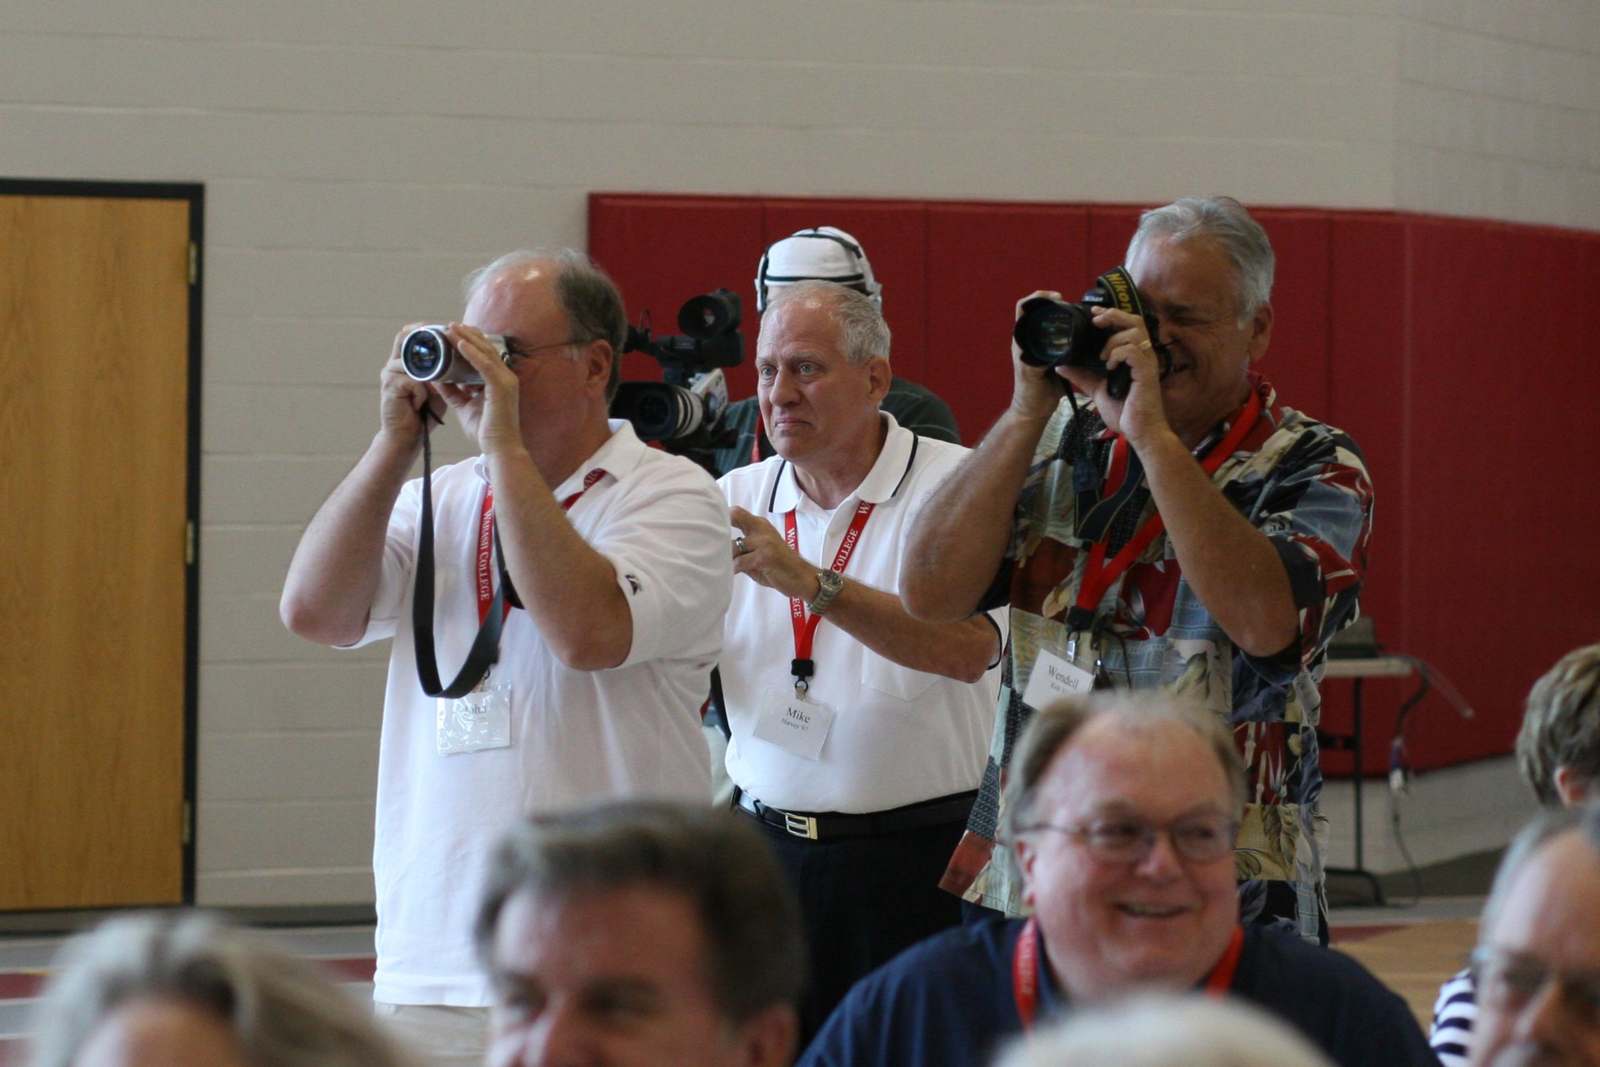 a group of men taking pictures